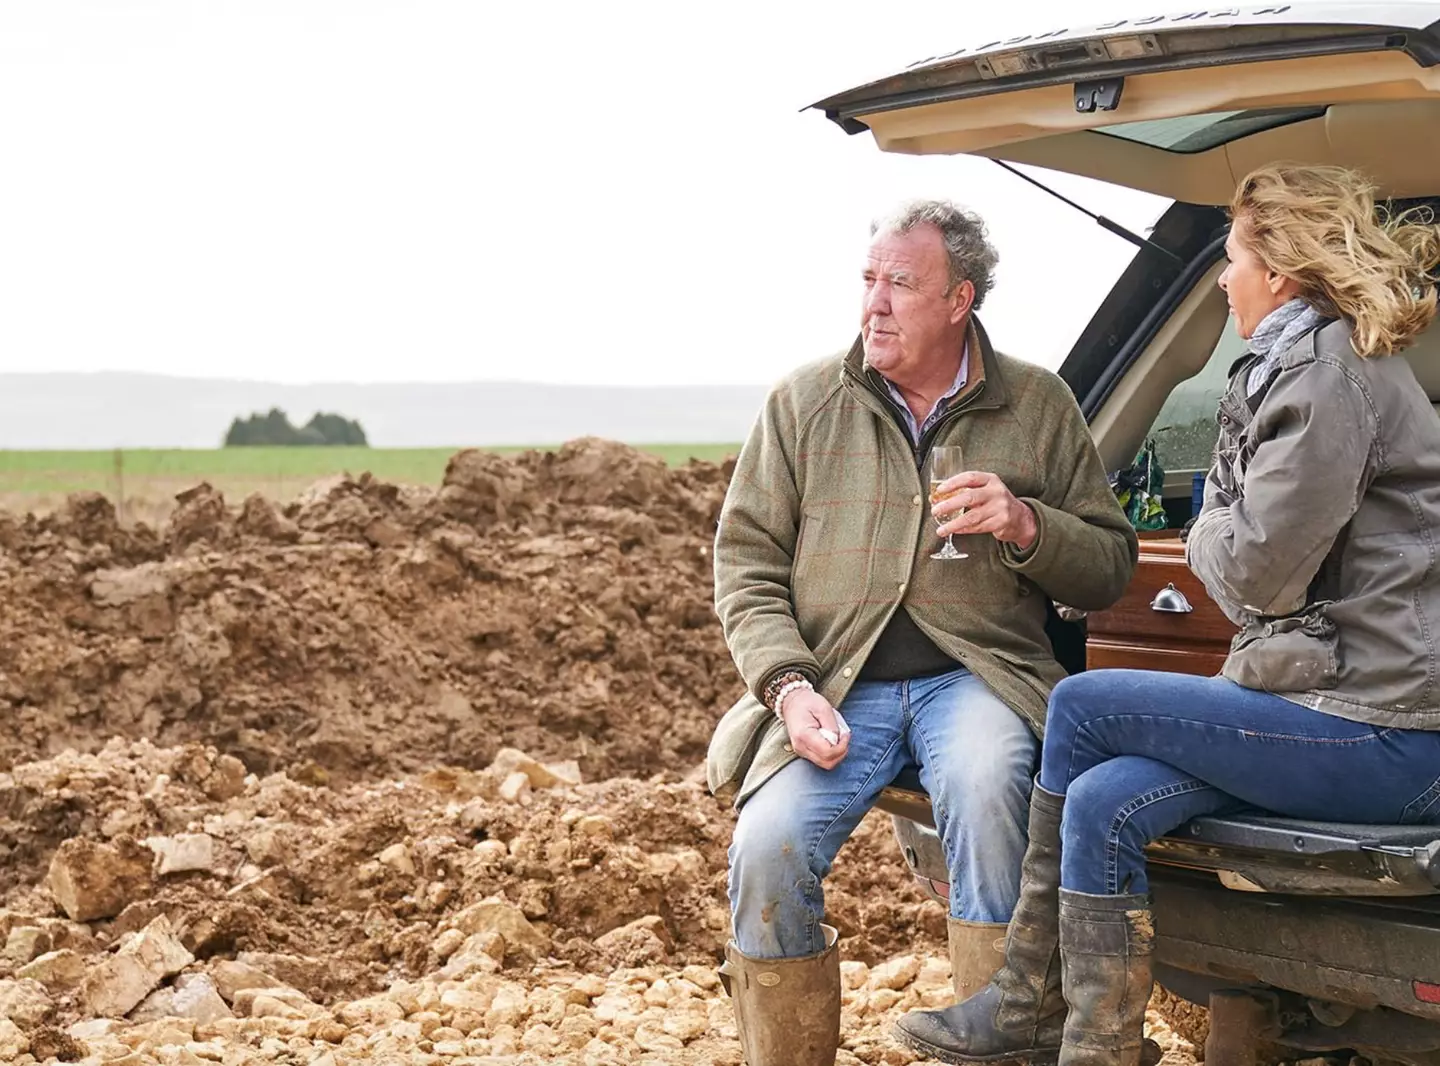 Jeremy Clarkson and his partner Lisa Hogan at Diddly Squat Farm. (Amazon Prime Video)